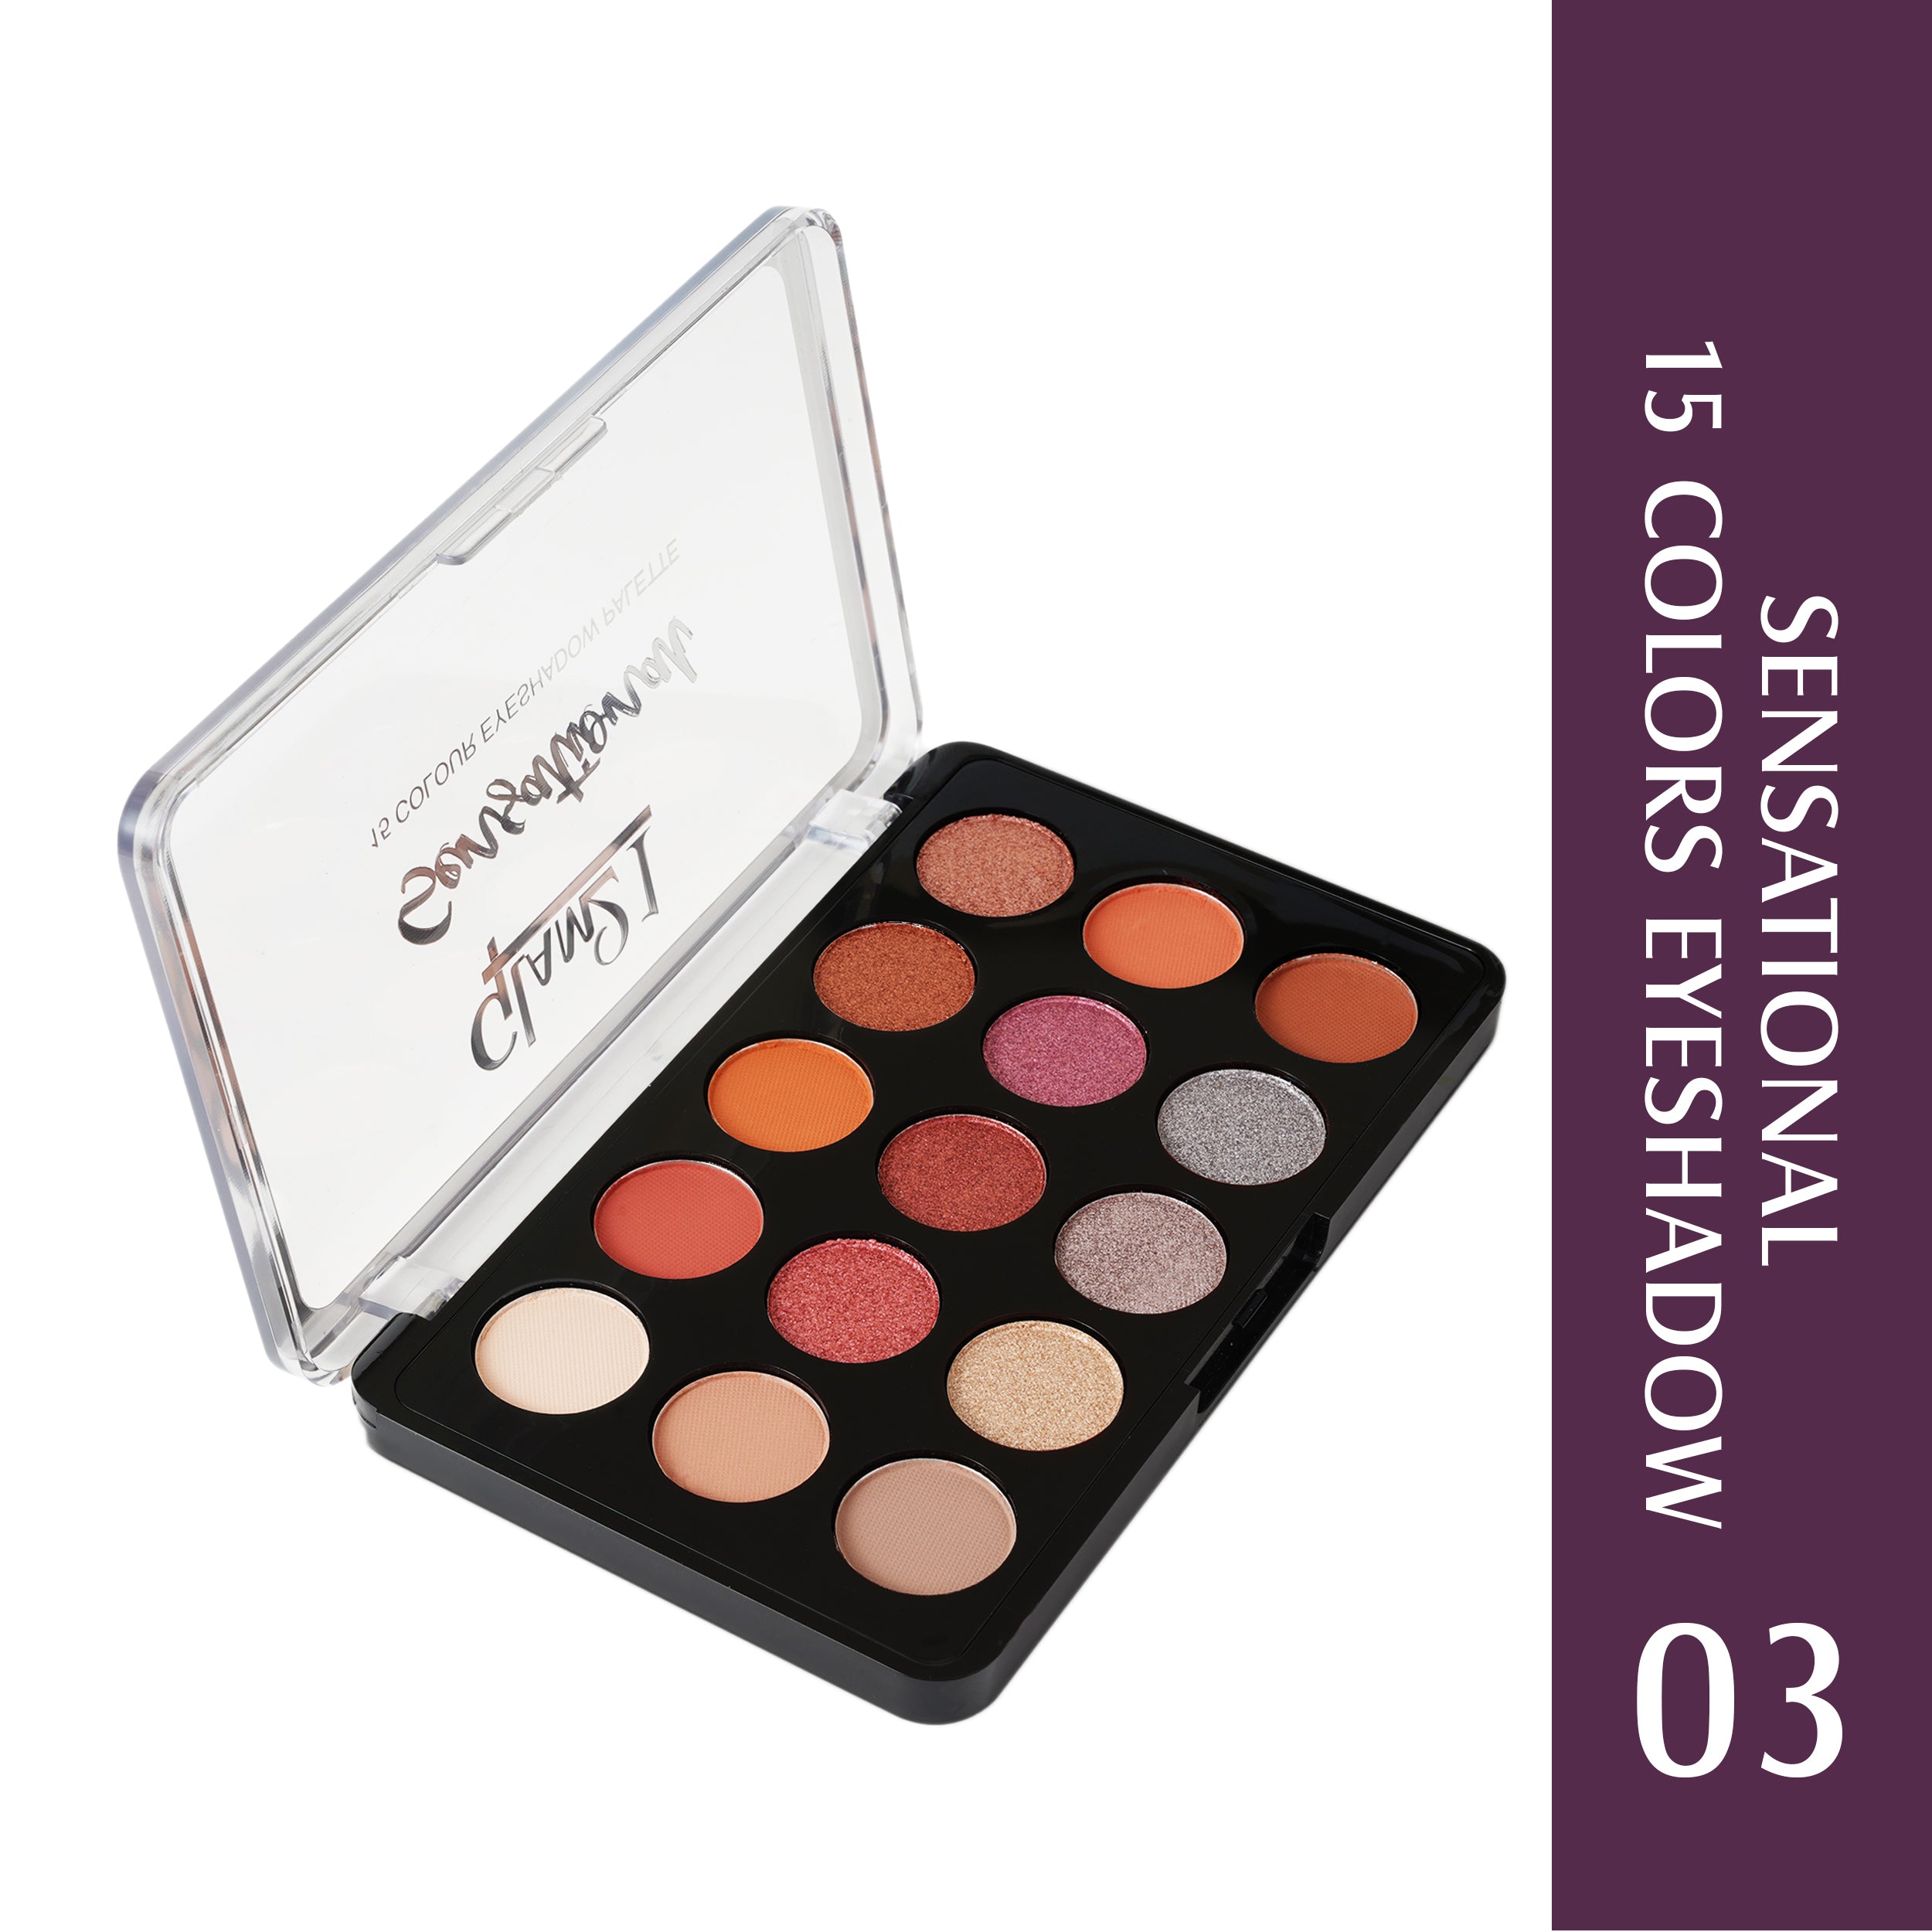 Glam21 Sensational 15 Colour Eyeshadow Palette-Unique Combination of Mattes & Shimmers 14 g (Shade-03)